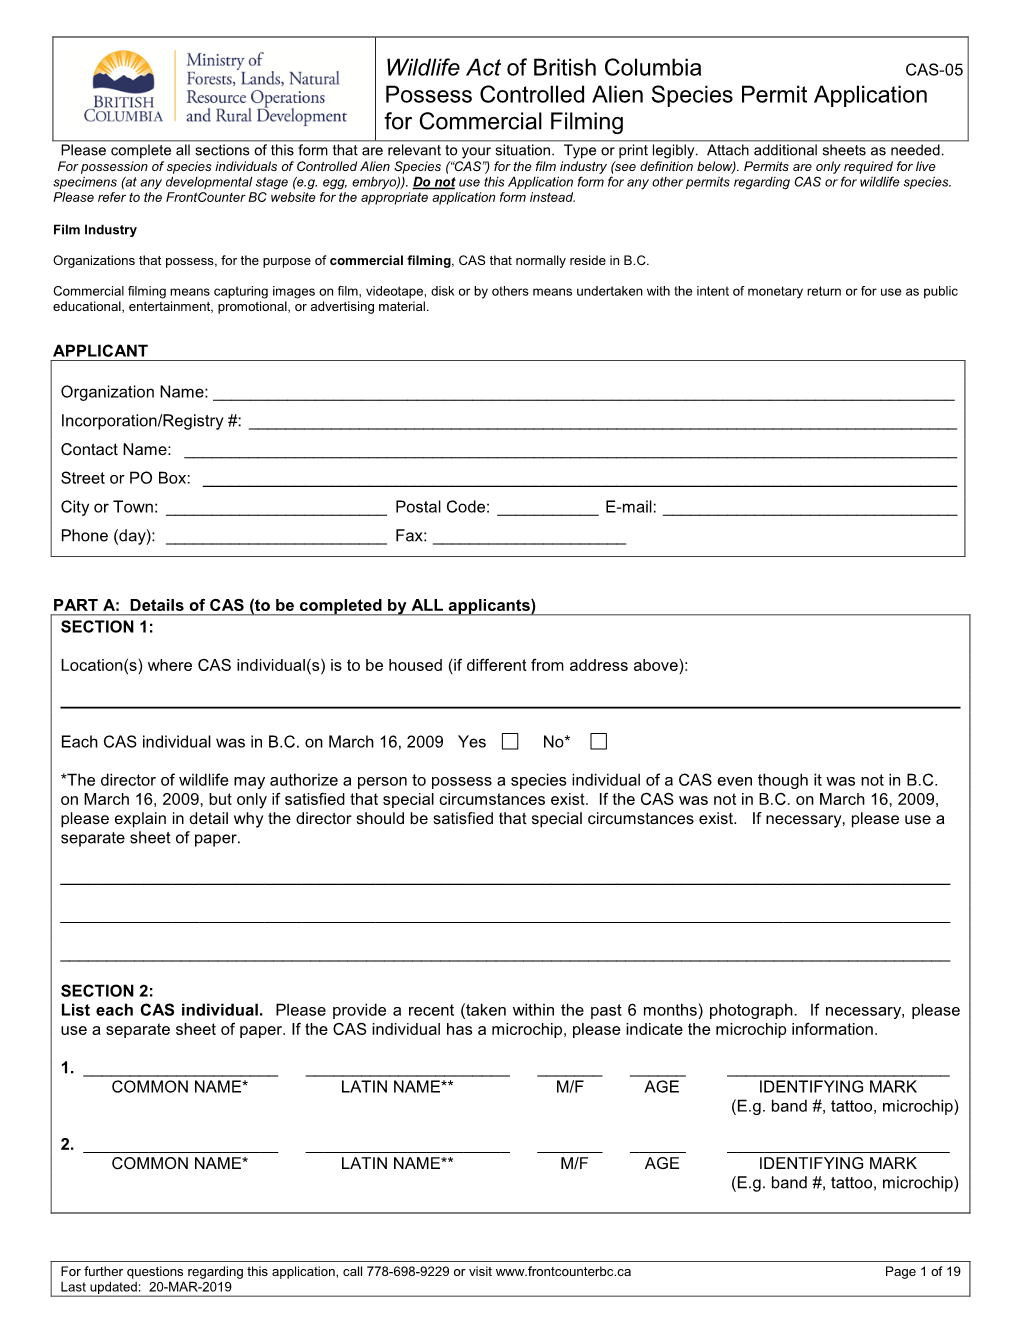 Controlled Alien Species Permit Application for Commercial Filming Please Complete All Sections of This Form That Are Relevant to Your Situation